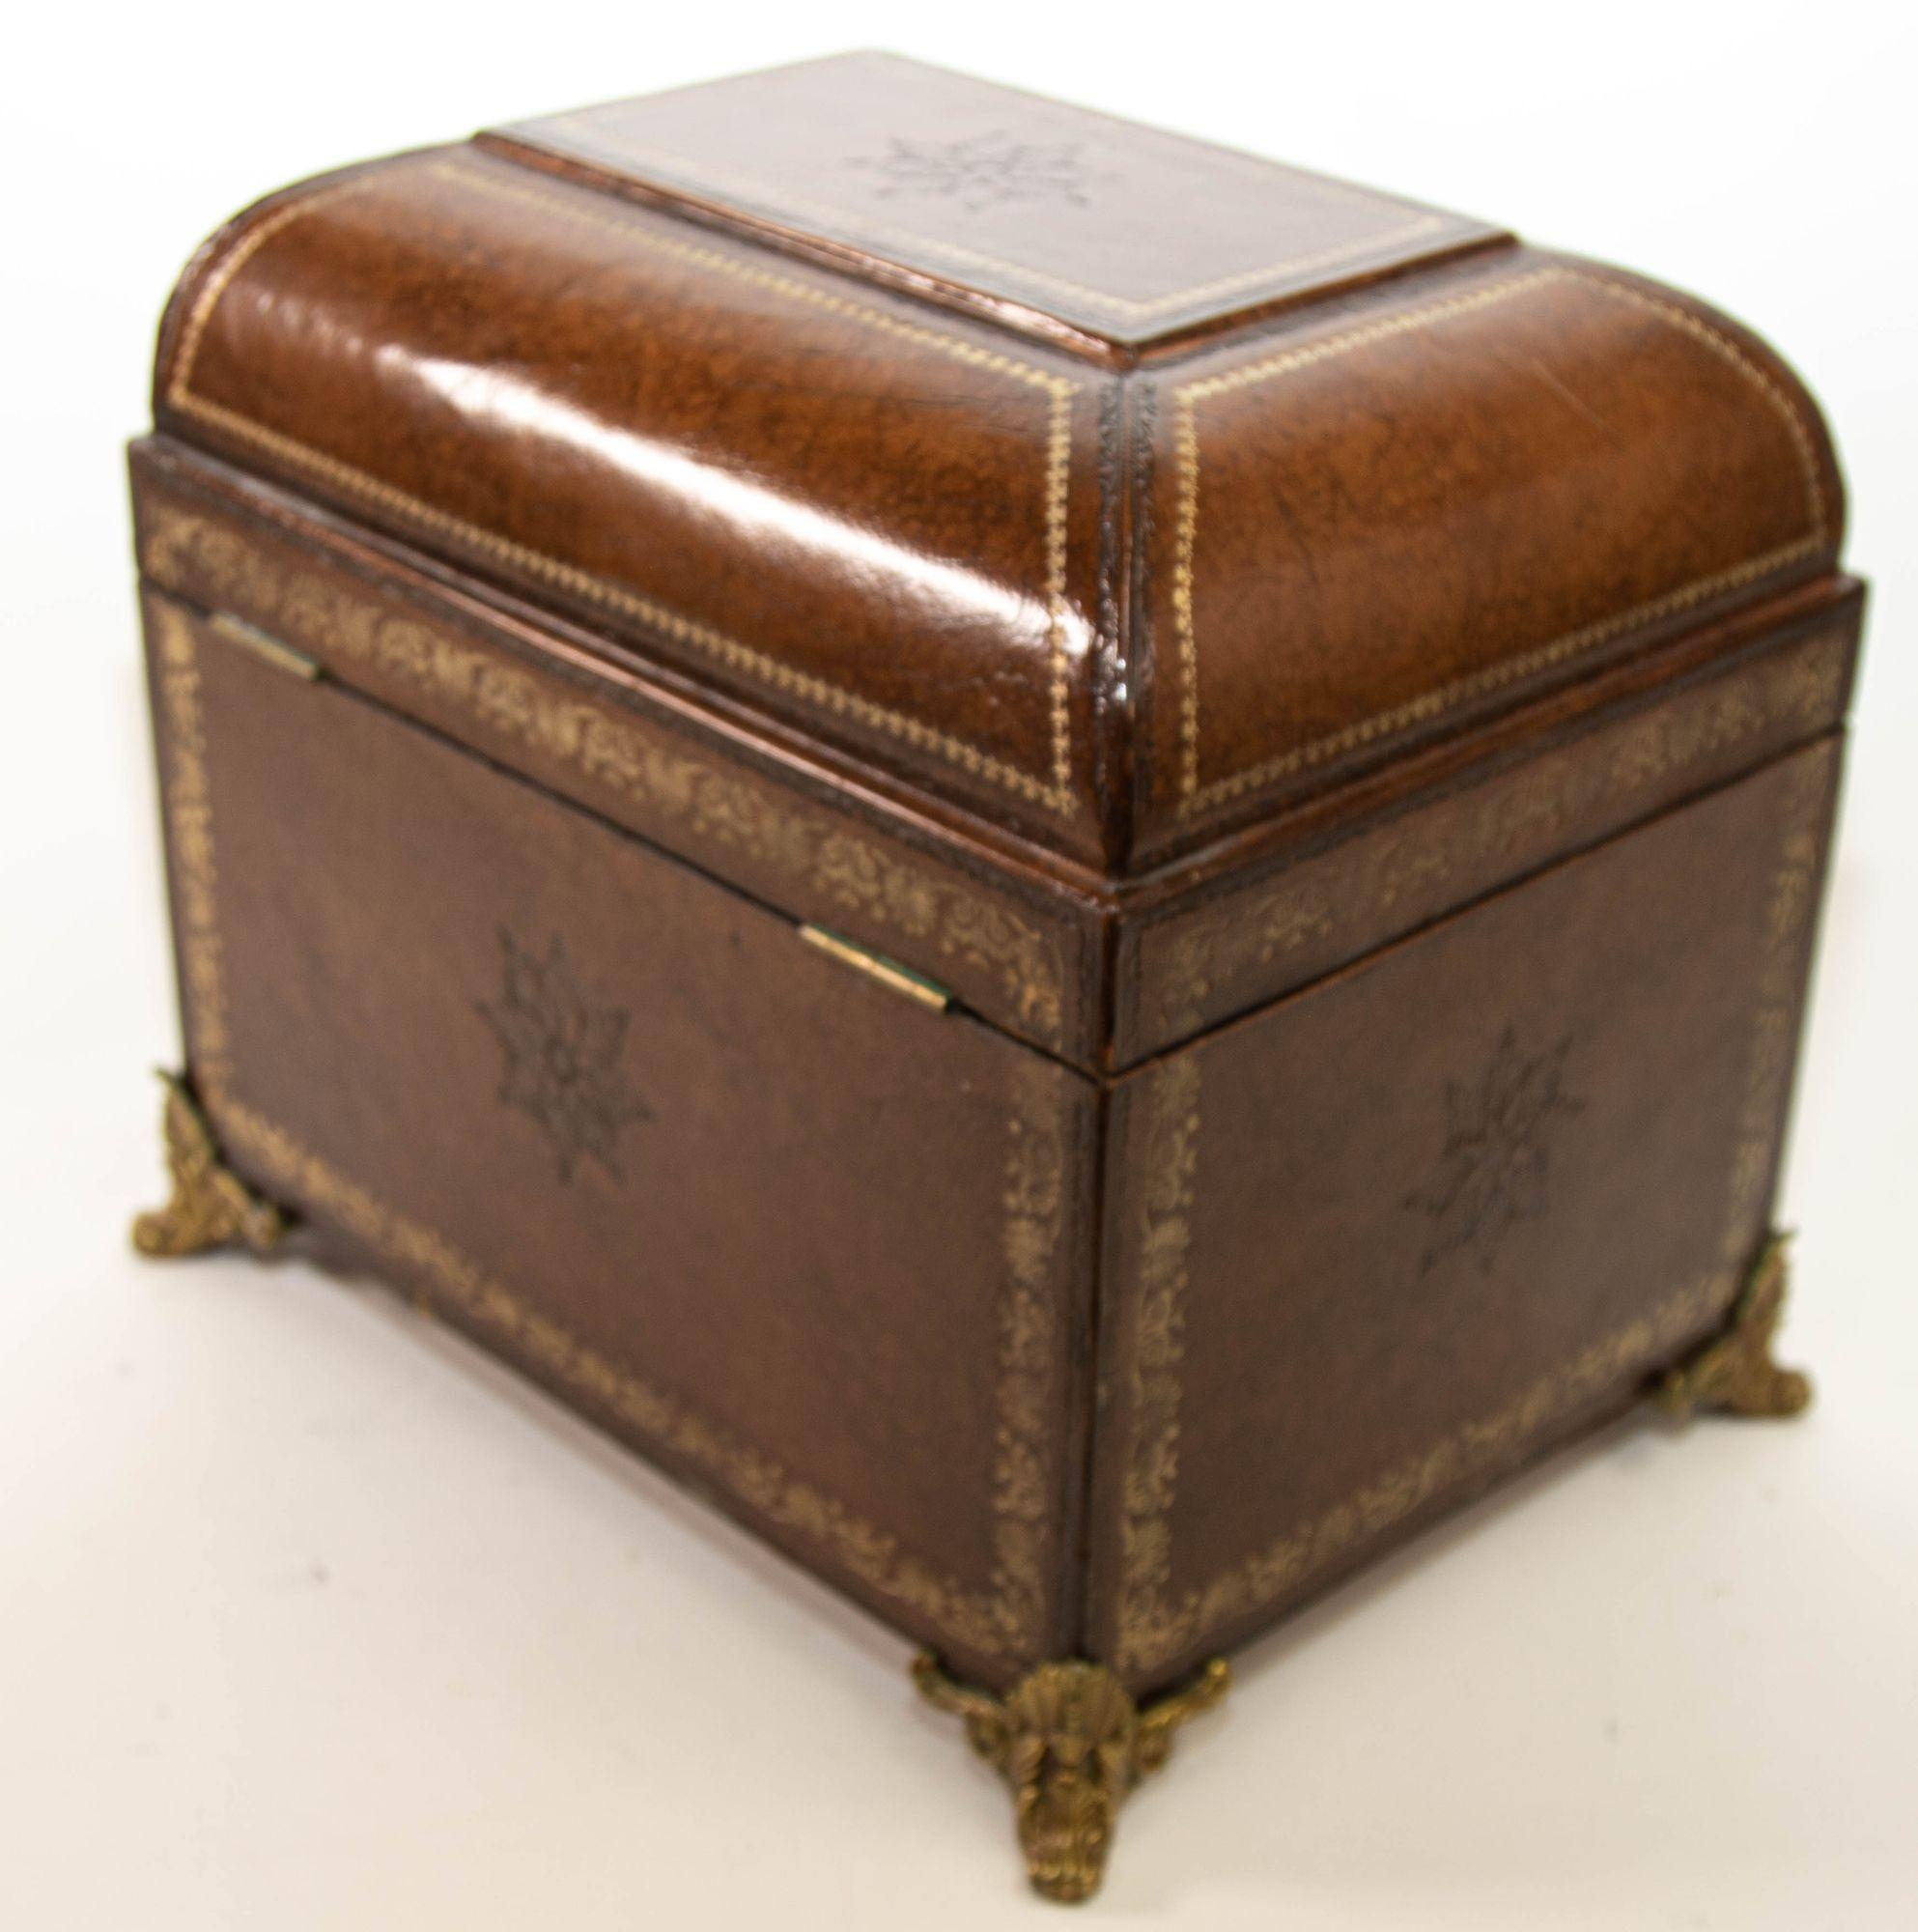 Italian Brown Leather Jewelry Box with Gold Tooling.
Large Italian gilt tooled leather wrapped table box, with domed top gilt decoration, raised on four bronze paw feet.
Vintage leather wrapped trunk with solid brass ornate feet, the top opens to